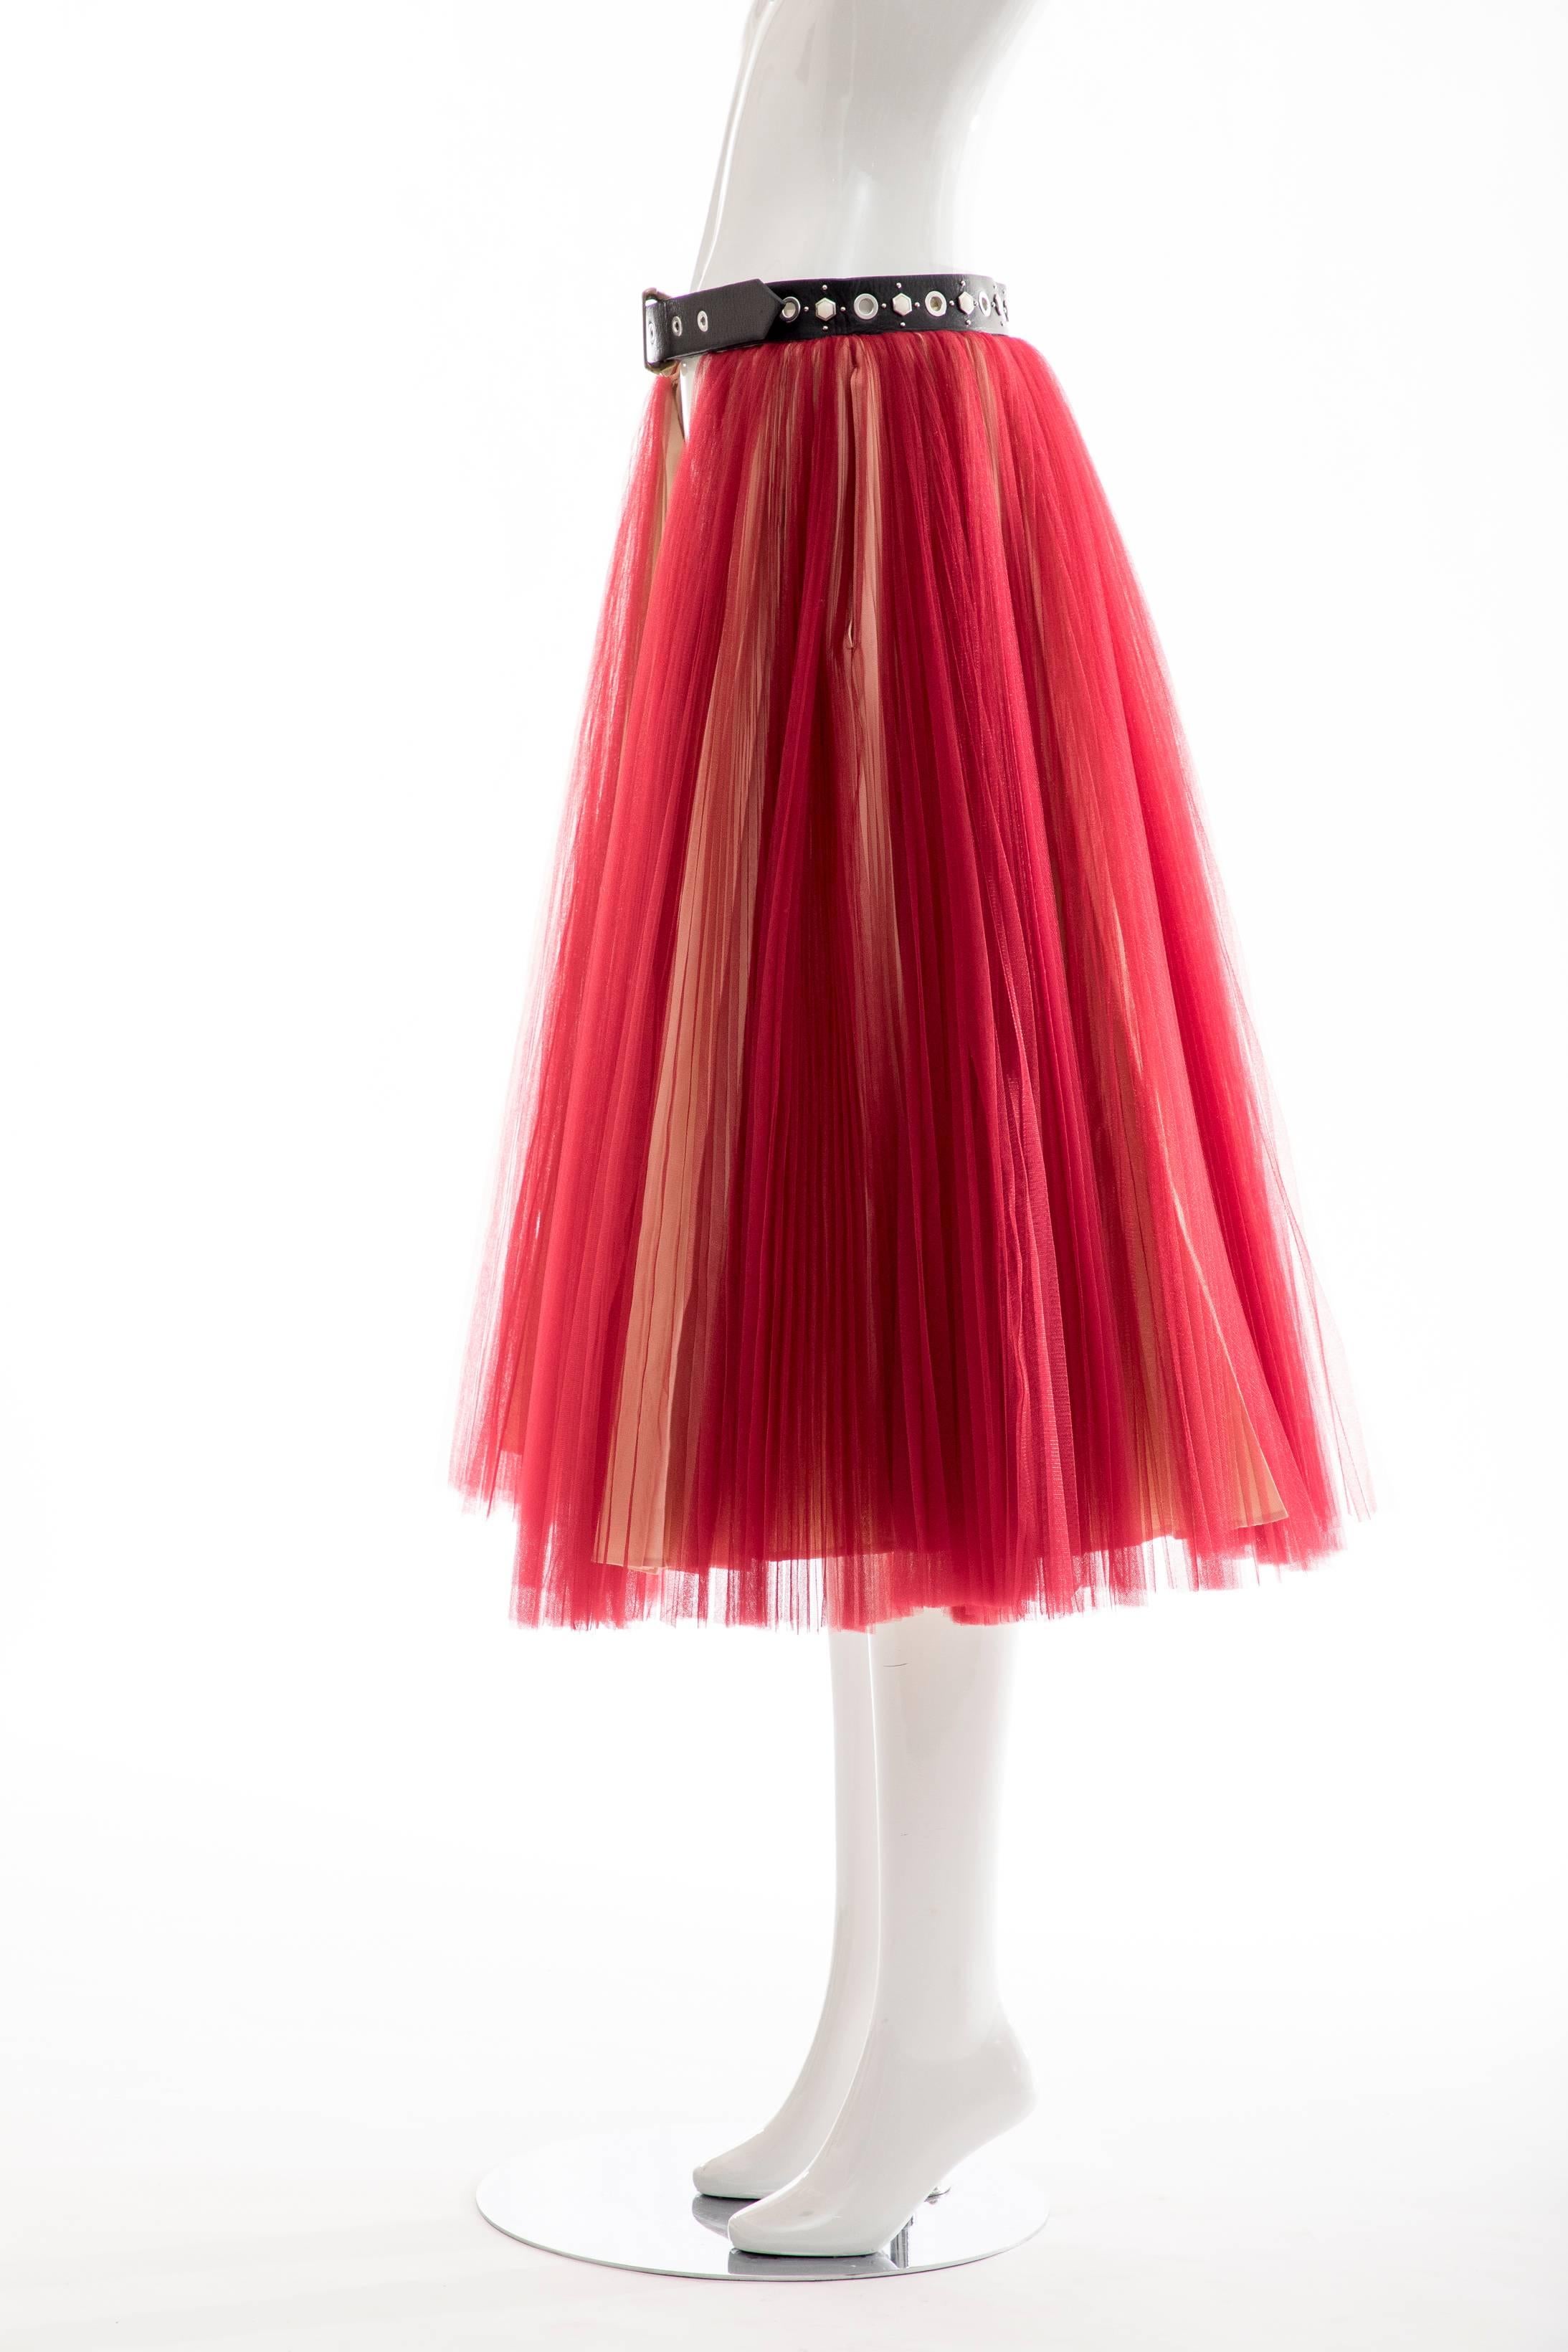 Undercover - Jun Takahashi Red Tulle Silver Pleated Skirt, Spring 2016 6